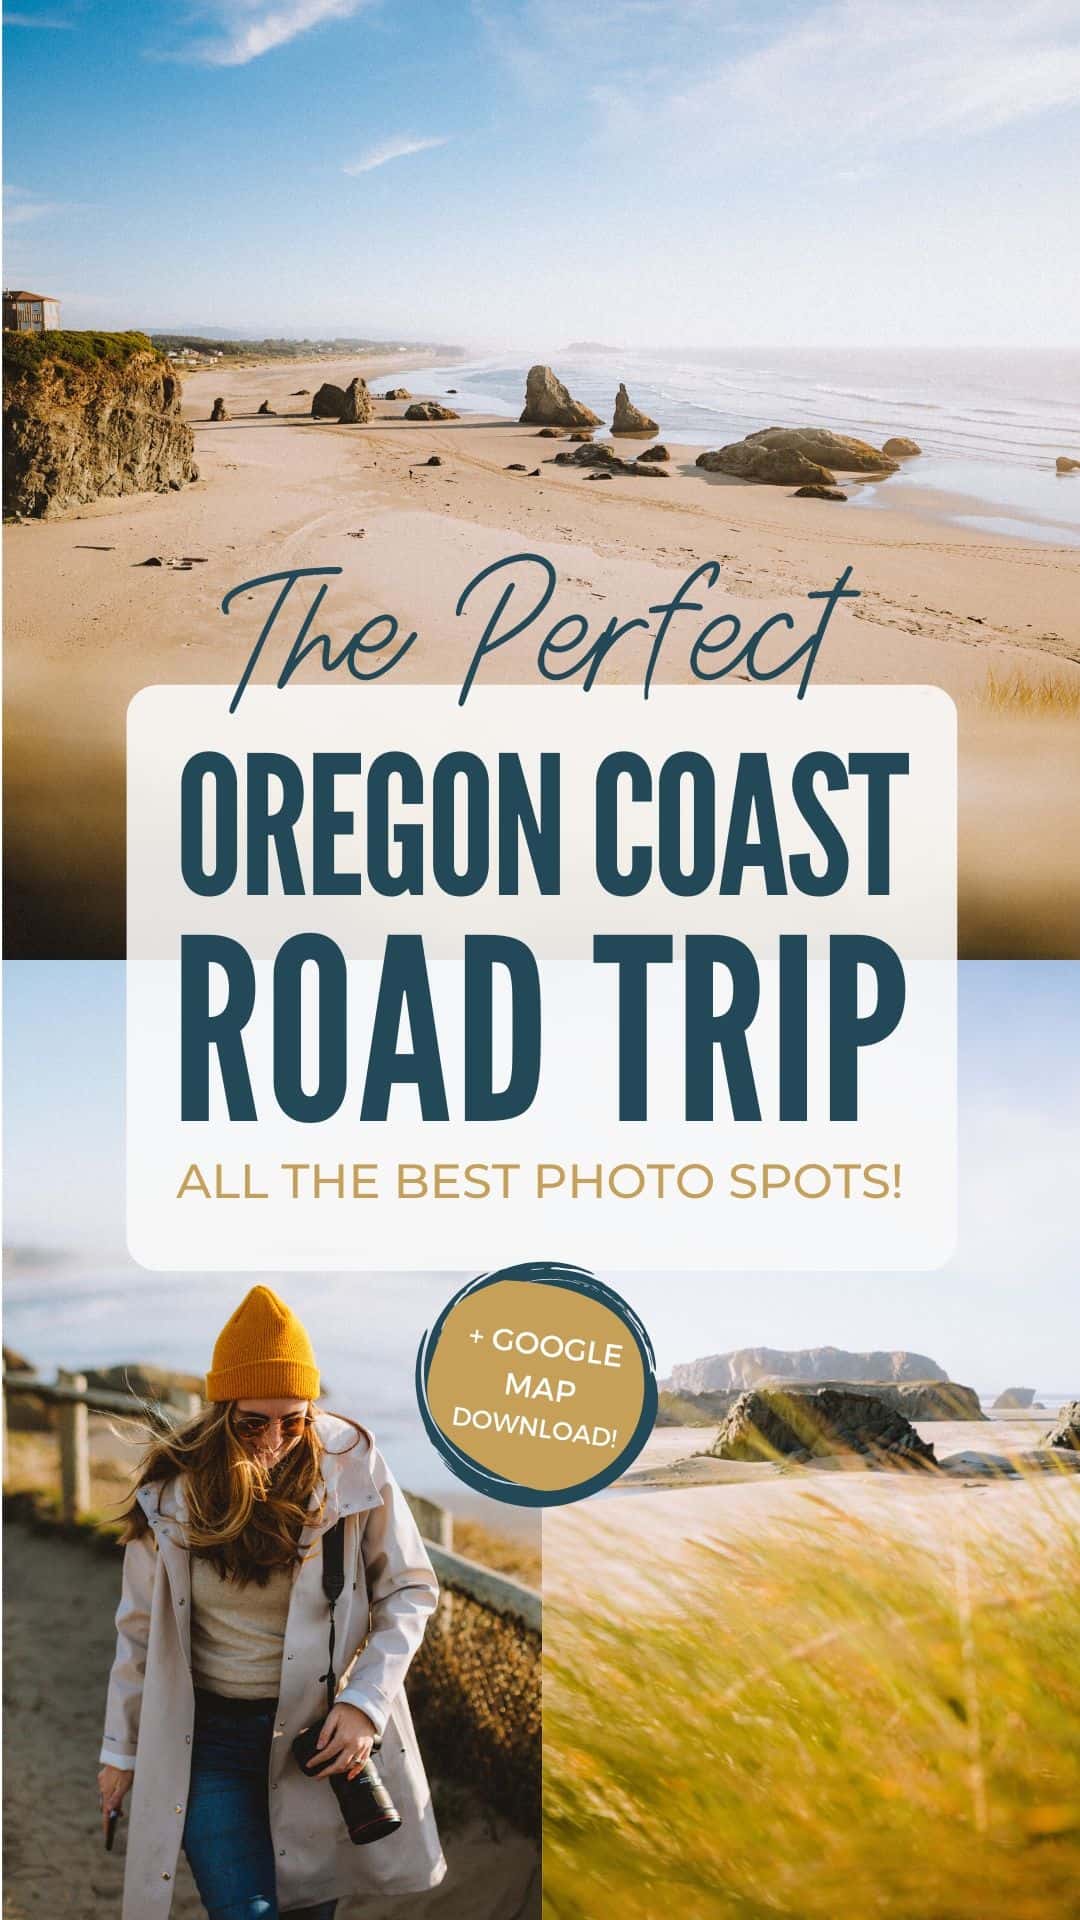 Driving the Oregon Coast and looking for the best places to see? We're sharing the best places to visit on the Oregon Coast, including everything from beaches, photo spots, hiking trails, and favorite towns on the Oregon Coast! Save this post for your next epic trip to the Pacific Northwest! #Oregoncoast #Oregon #roadtrip #cannonbeach #PNW #pacificnorthwest #vacation #PacificNW #travel #photography #traveltips #themandagies